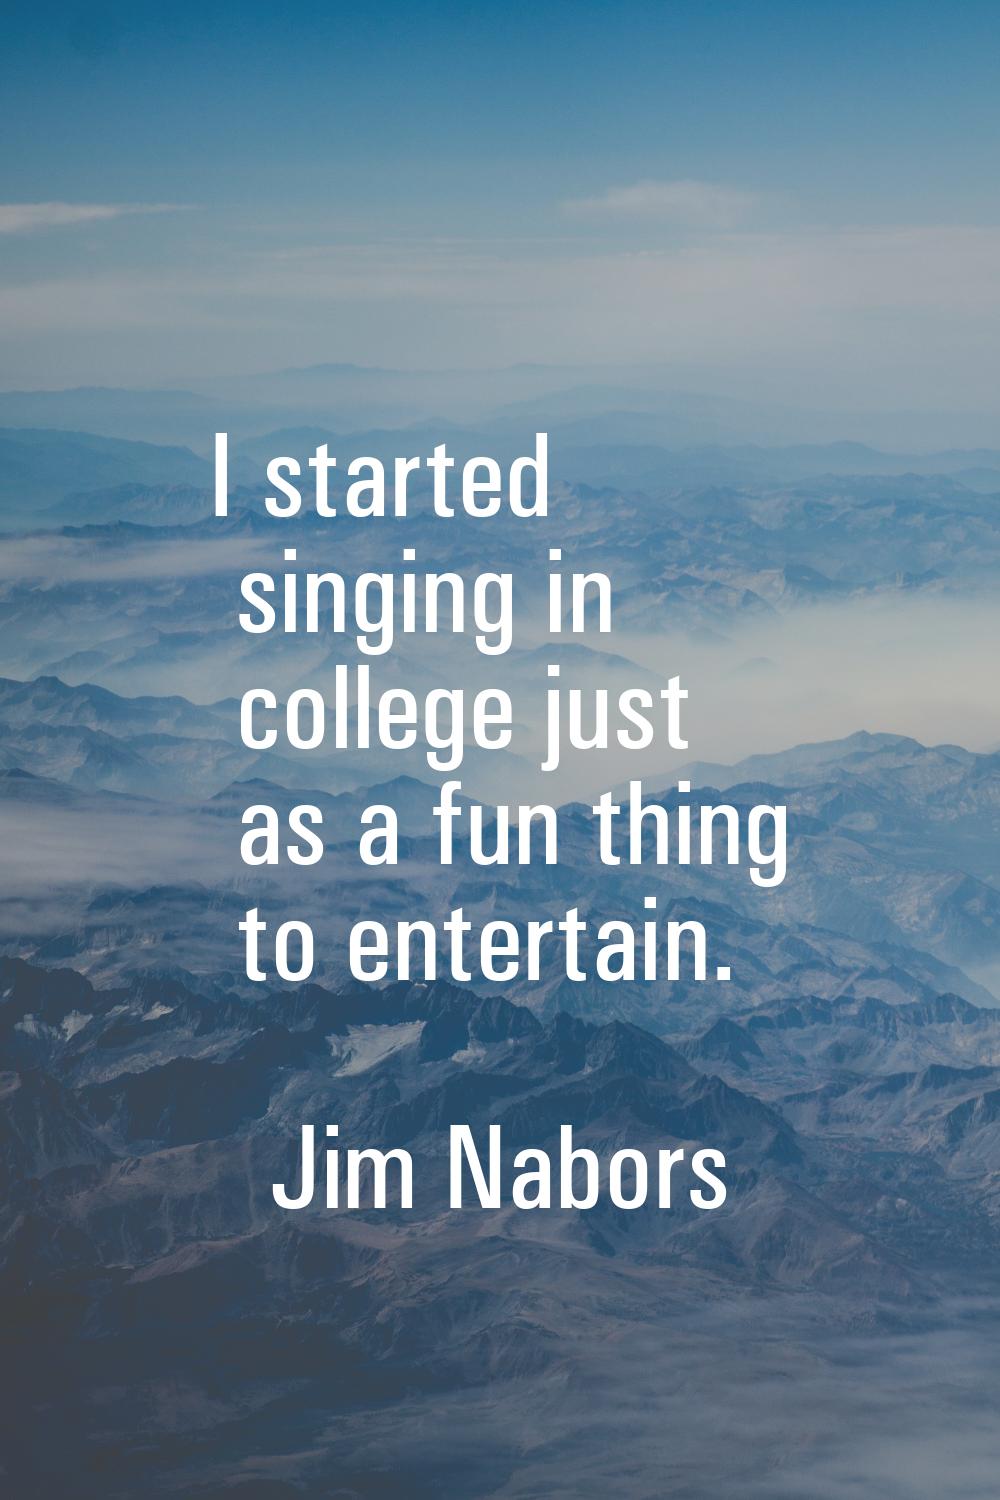 I started singing in college just as a fun thing to entertain.